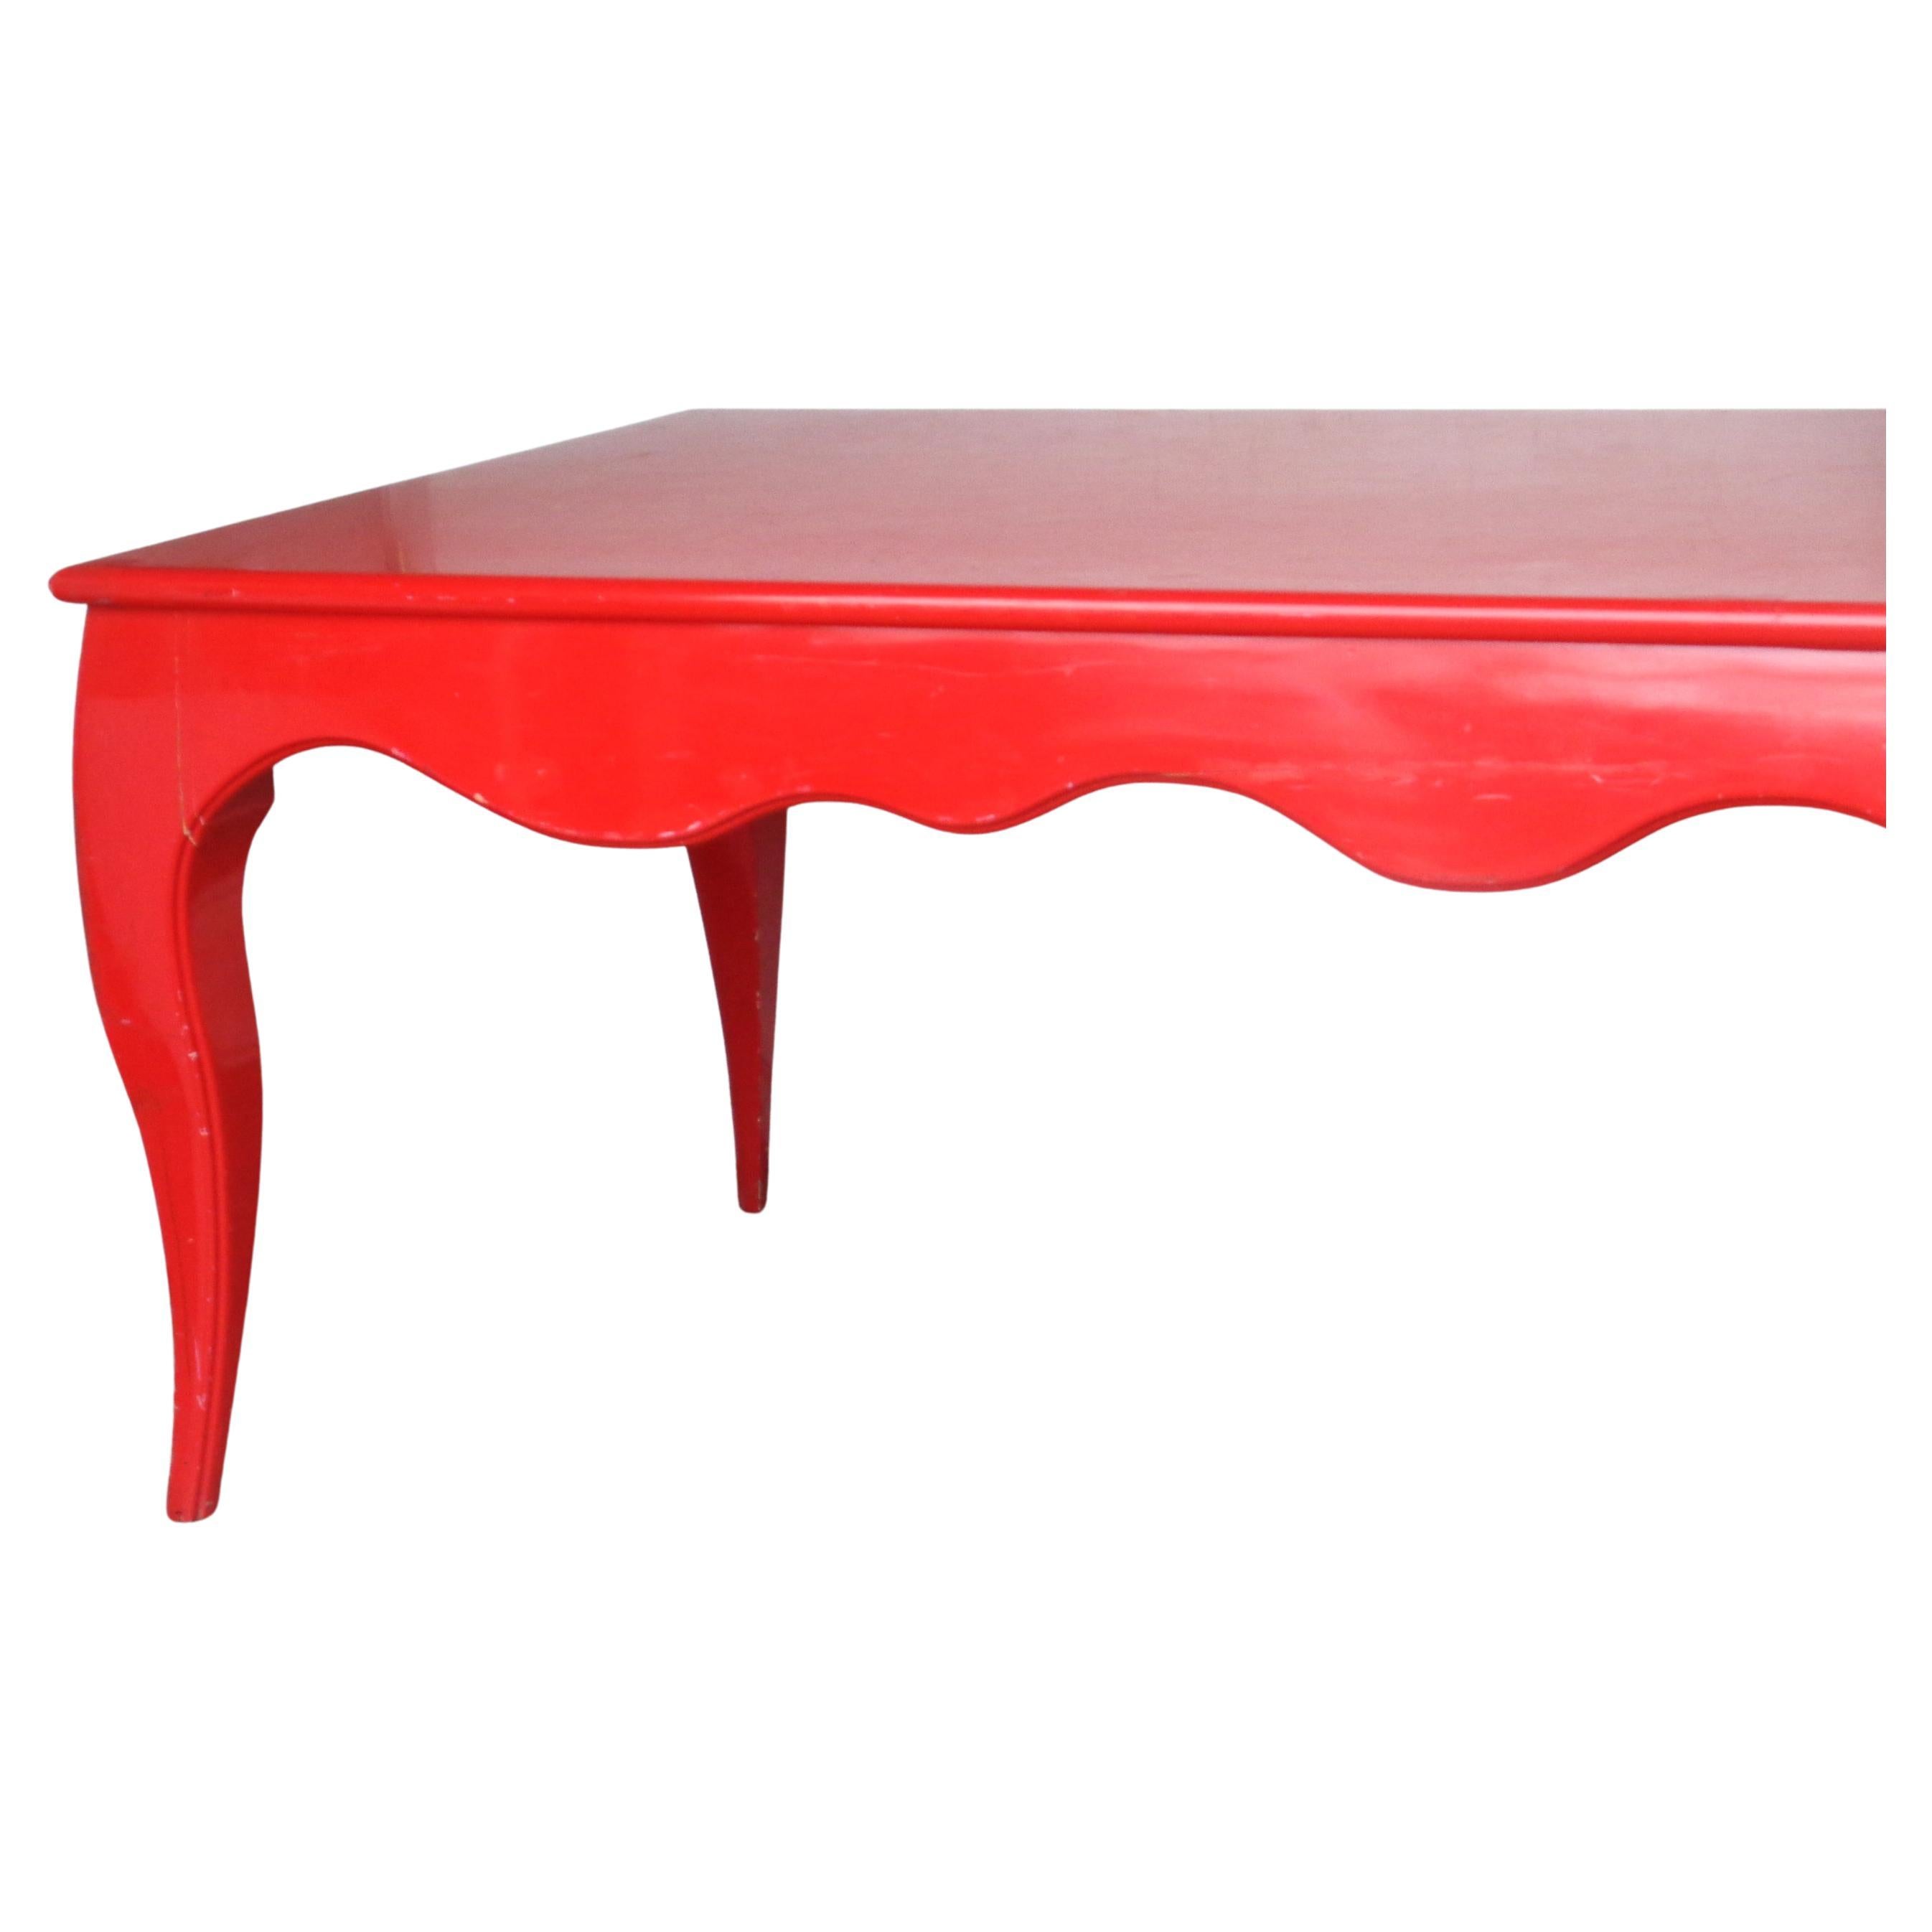 Large Red Lacquered Scallop Design Table style of Jean-Michel Frank, Circa 1970 For Sale 4